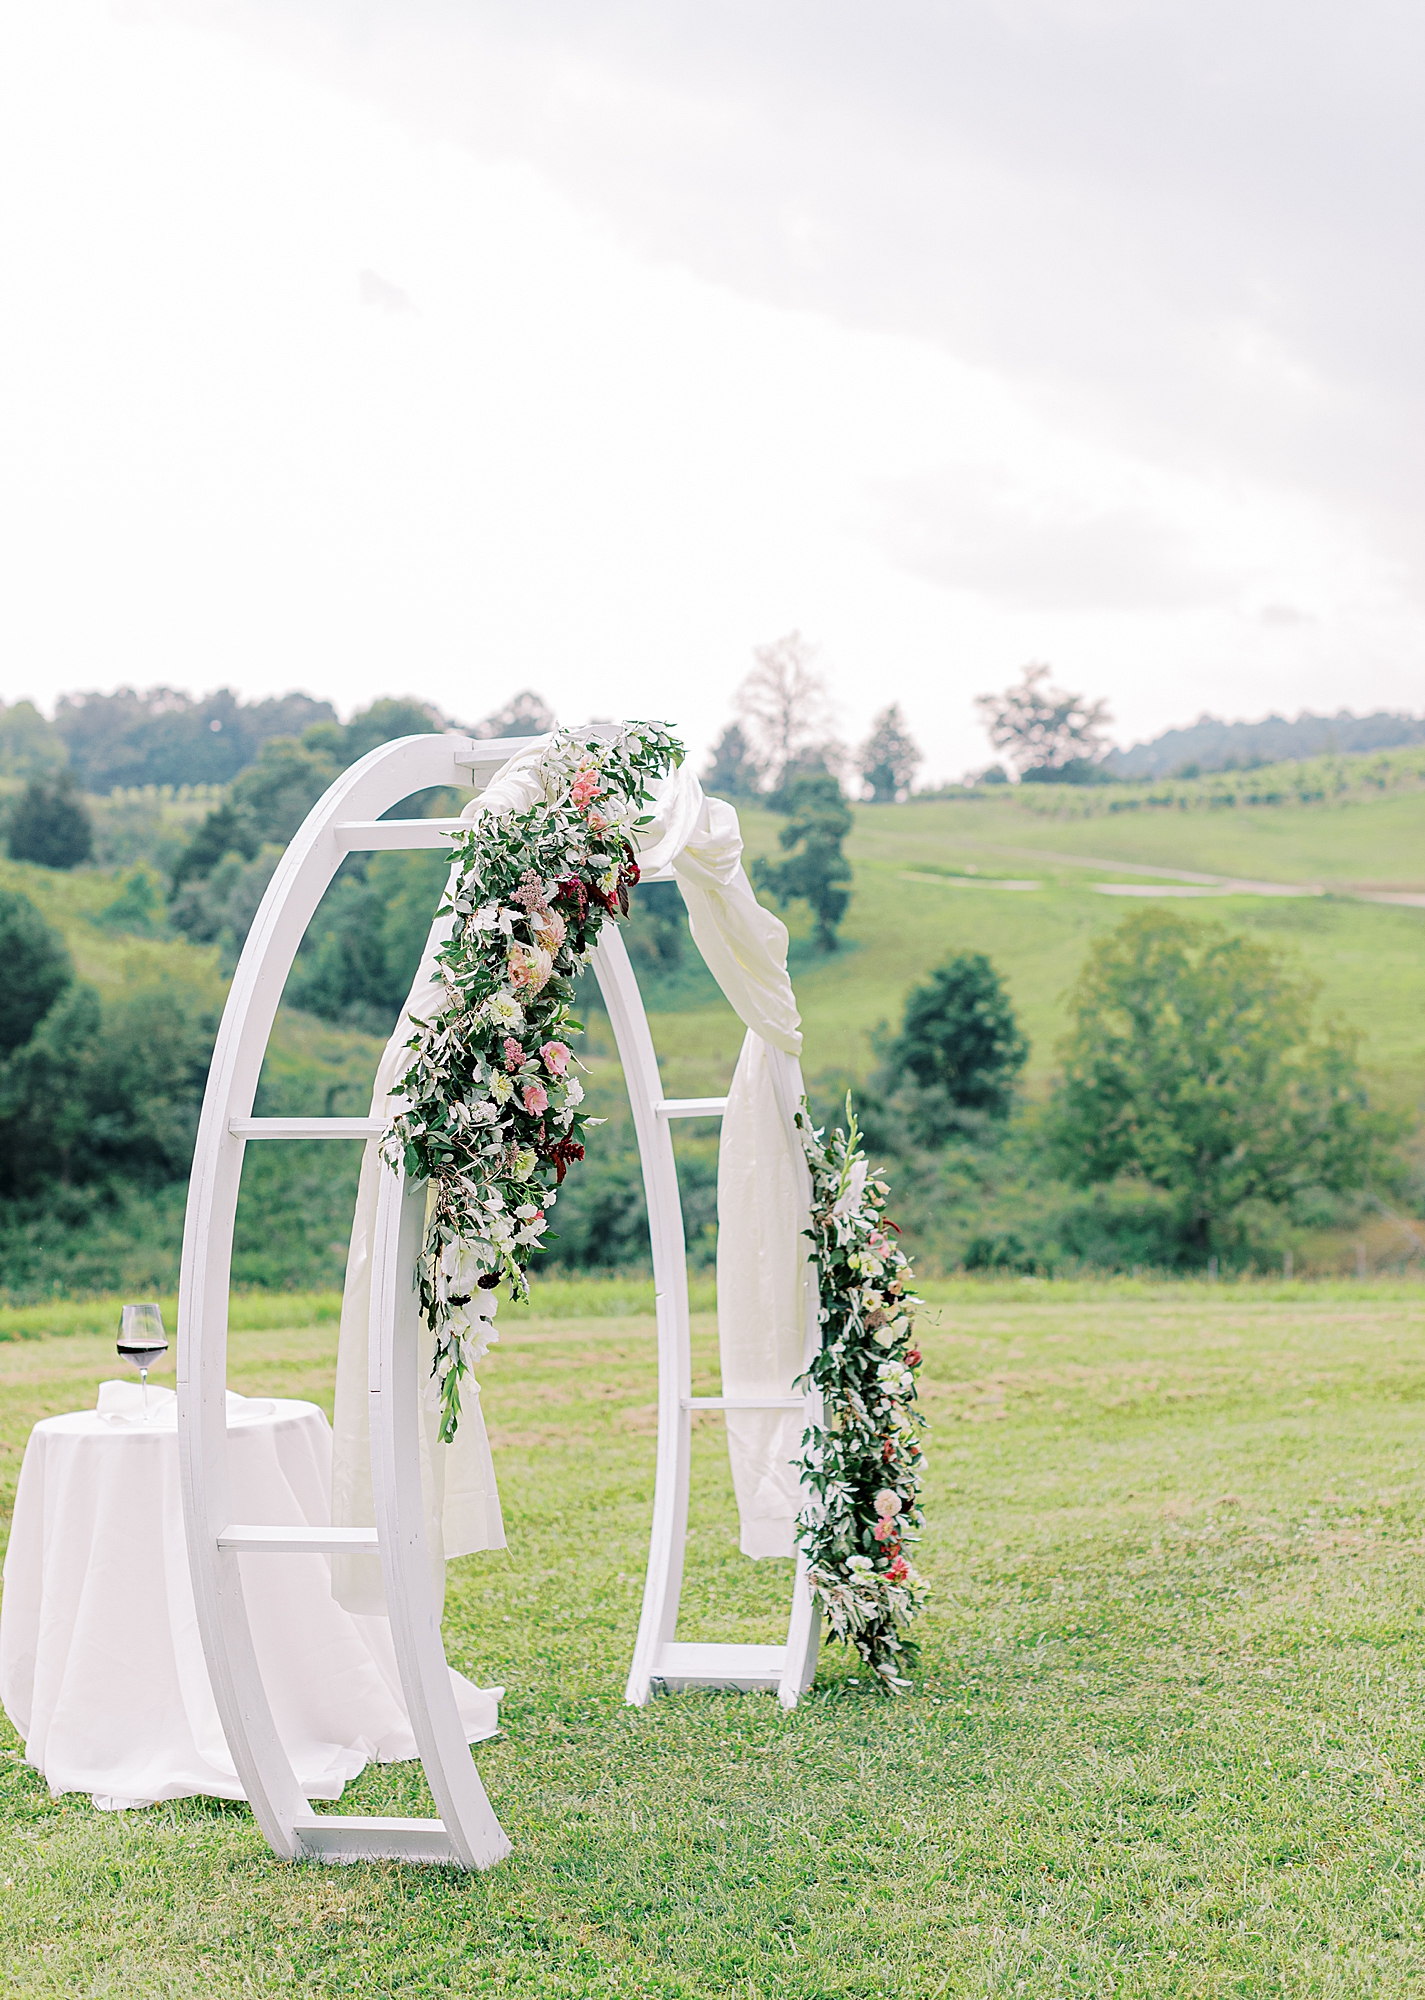 Floral arch at wedding ceremony.